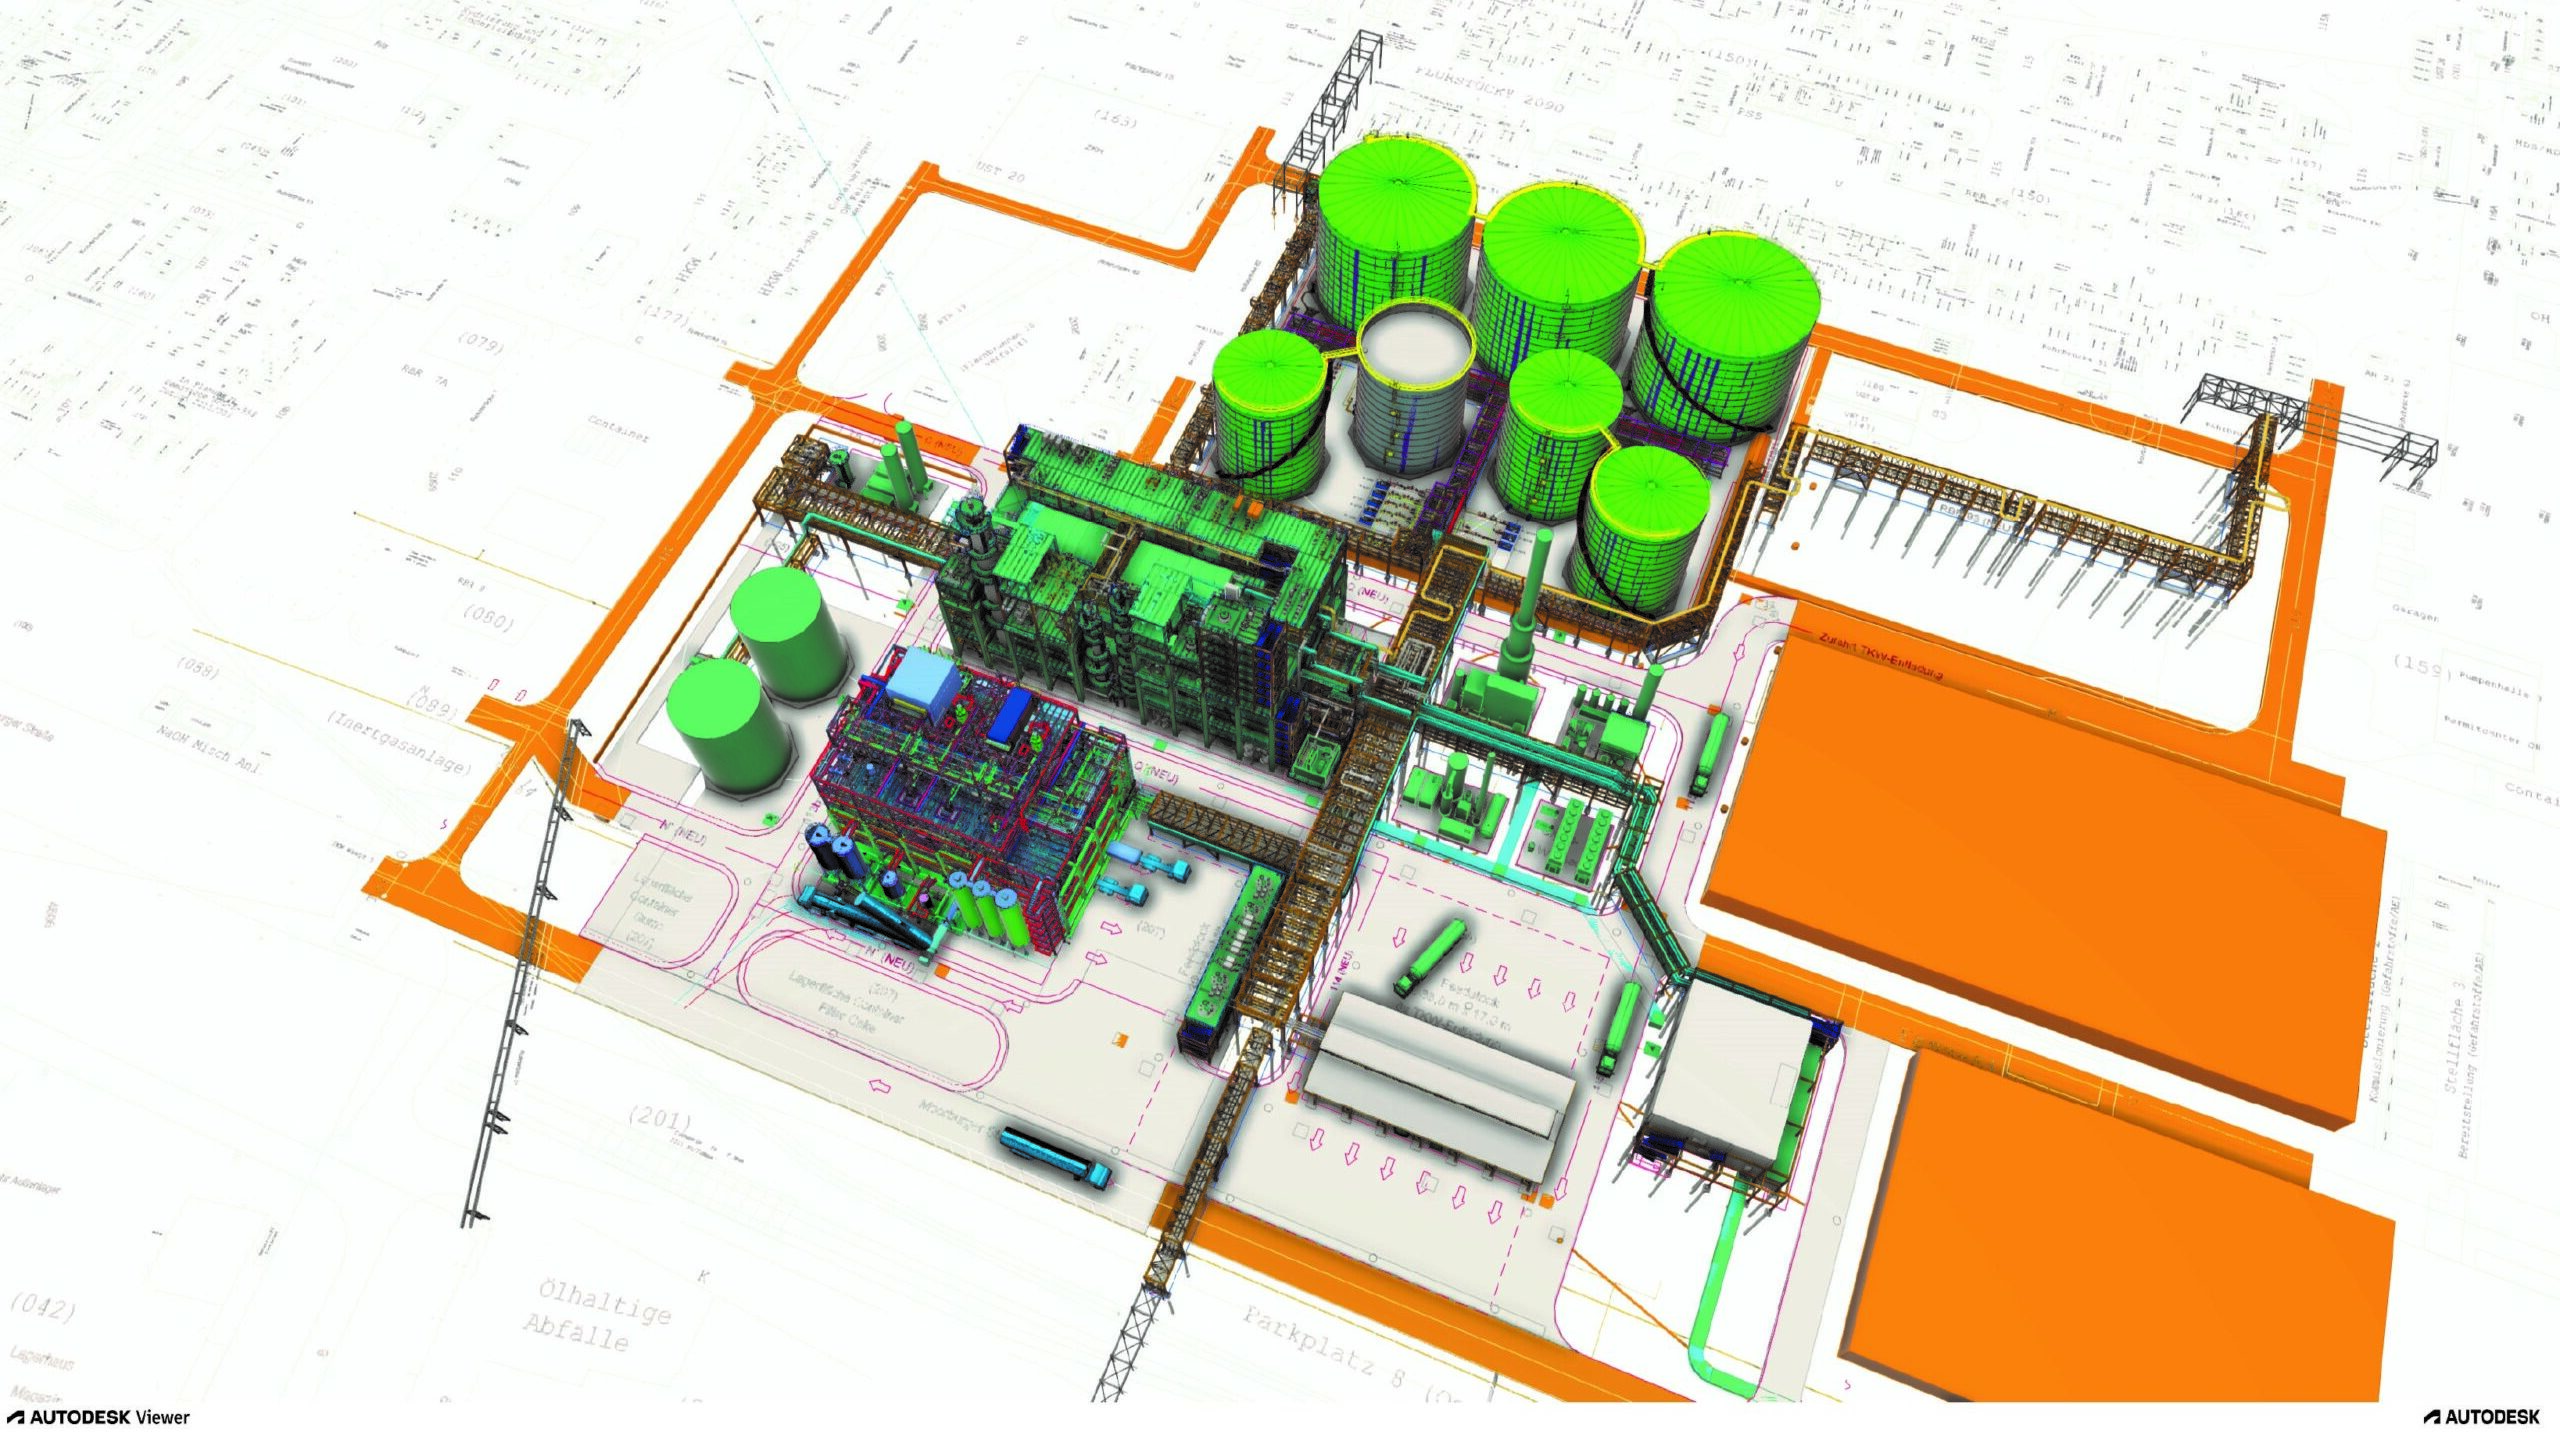 Schematic Depiction of the Biofuels Facility at the Holborn Refinery